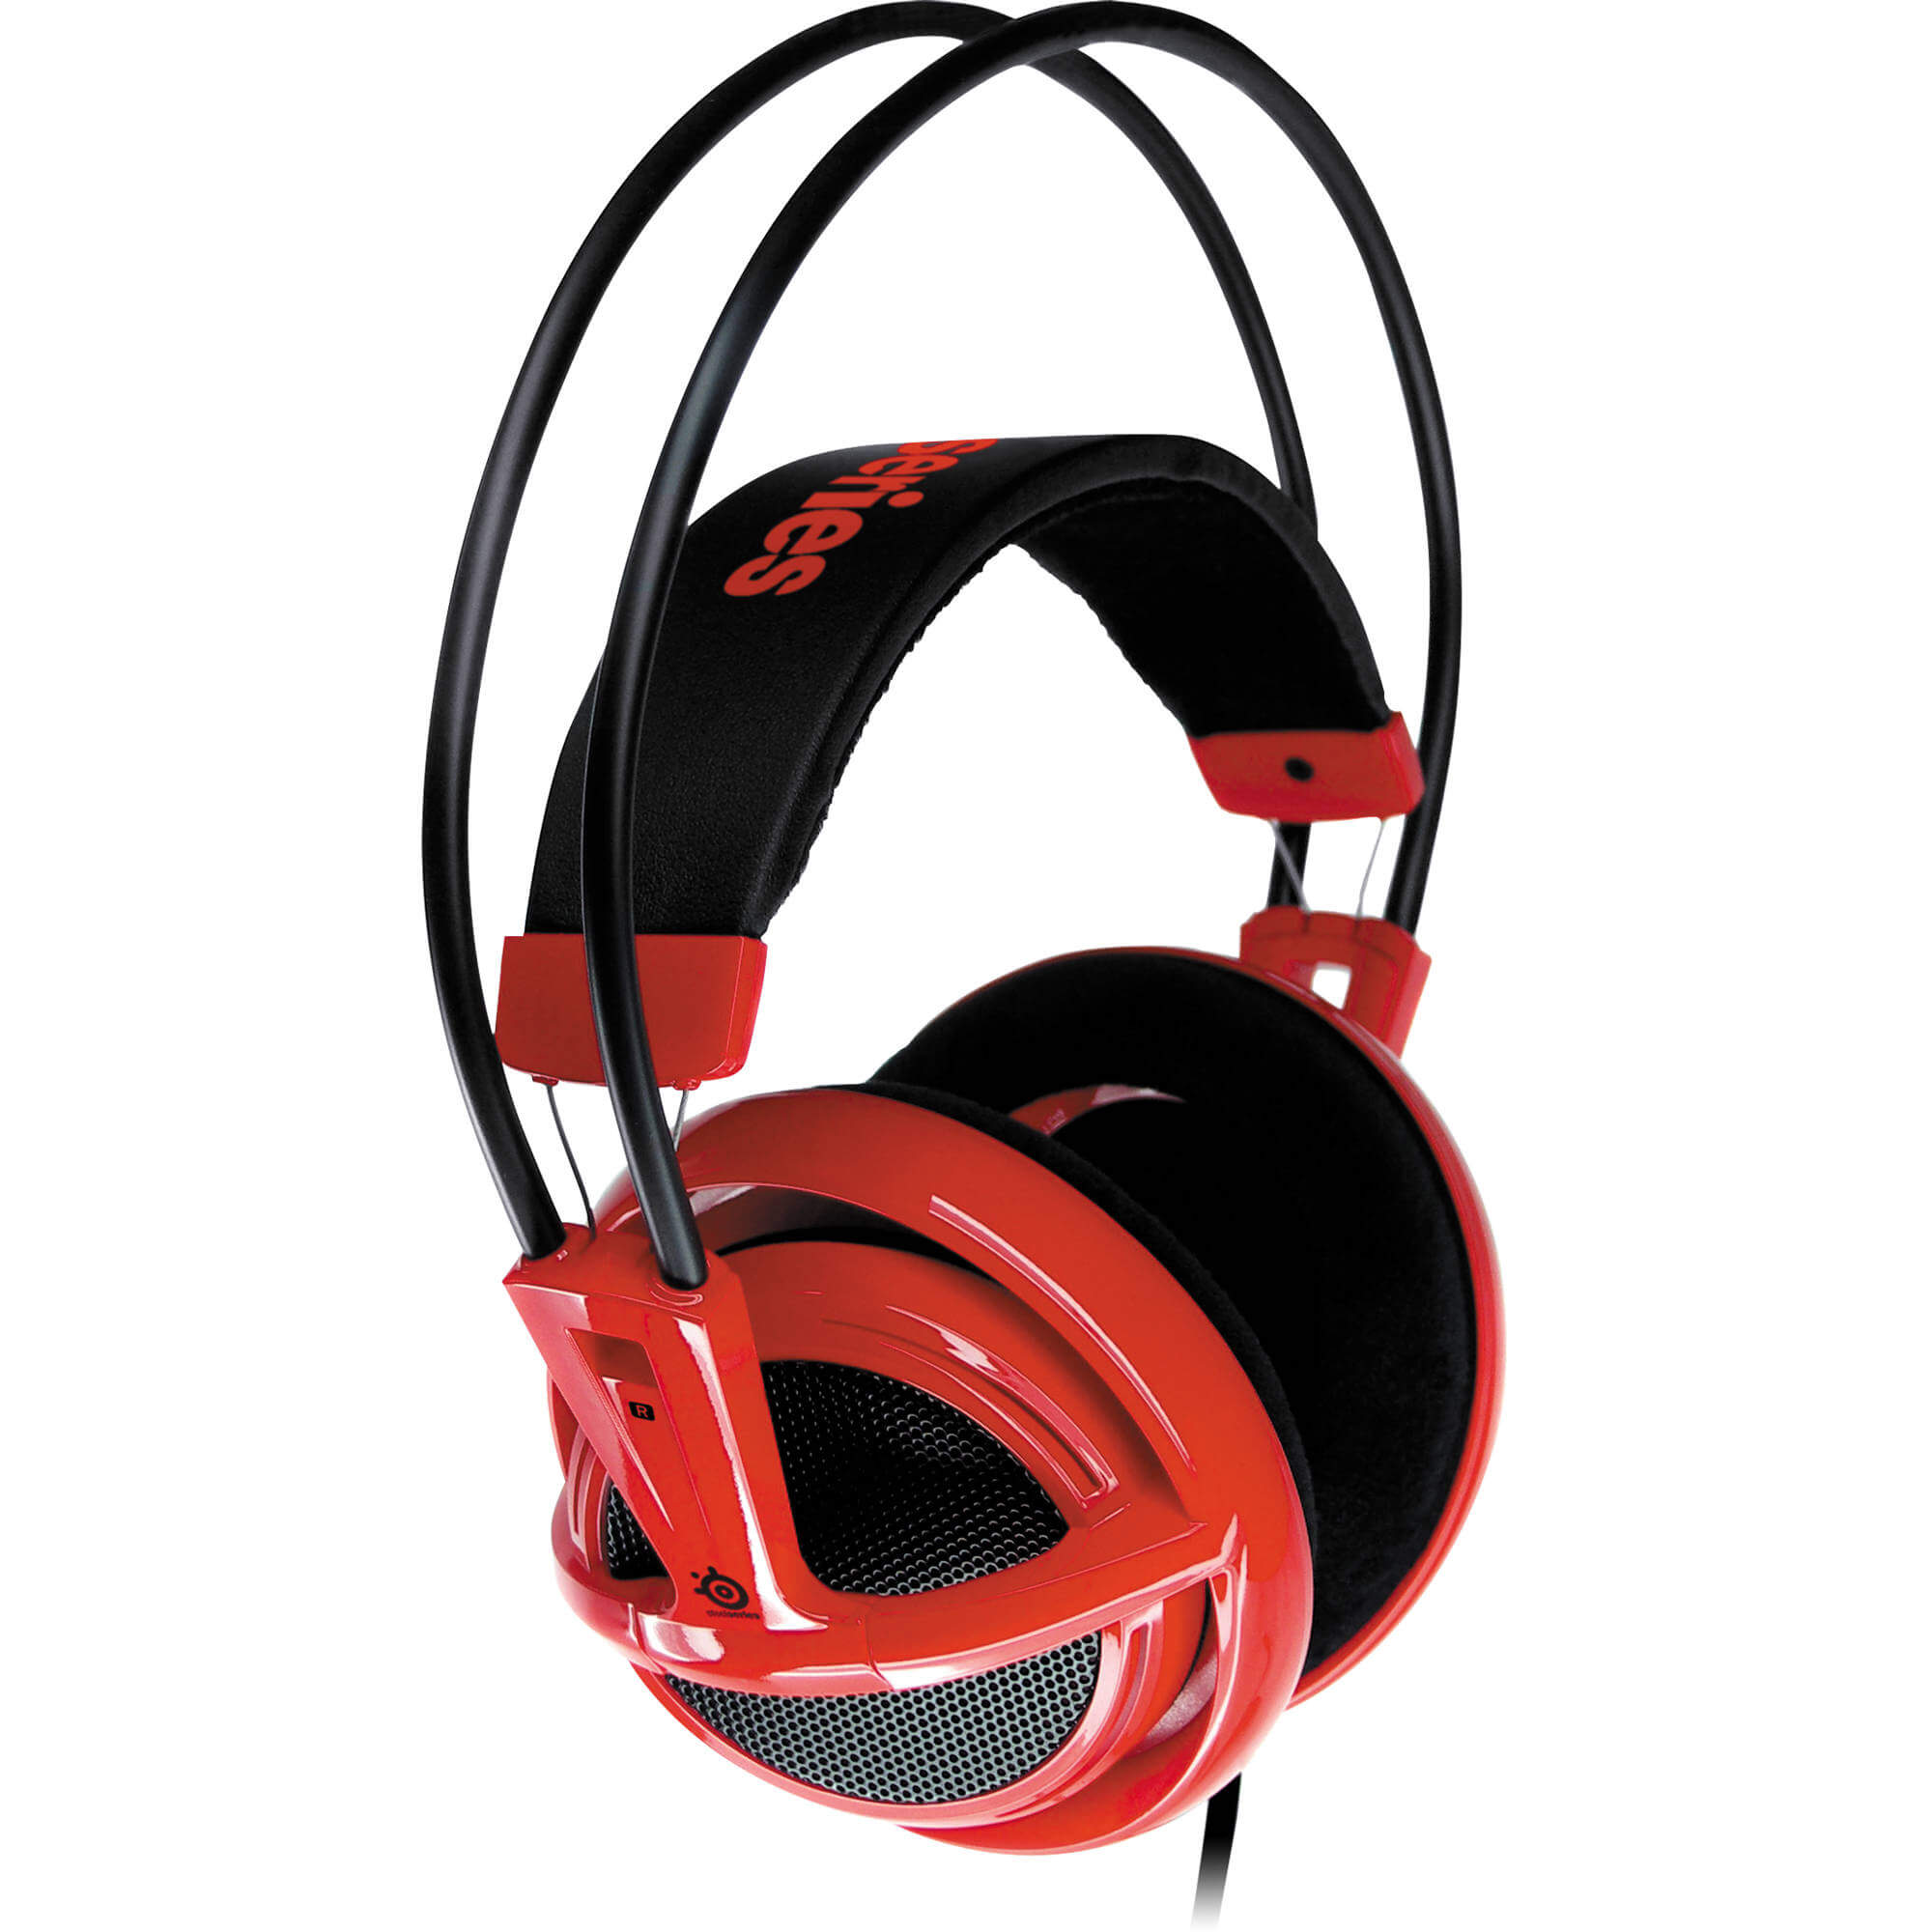 Cozy Best Wireless Gaming Headset For Pc Under 100 With Cozy Design